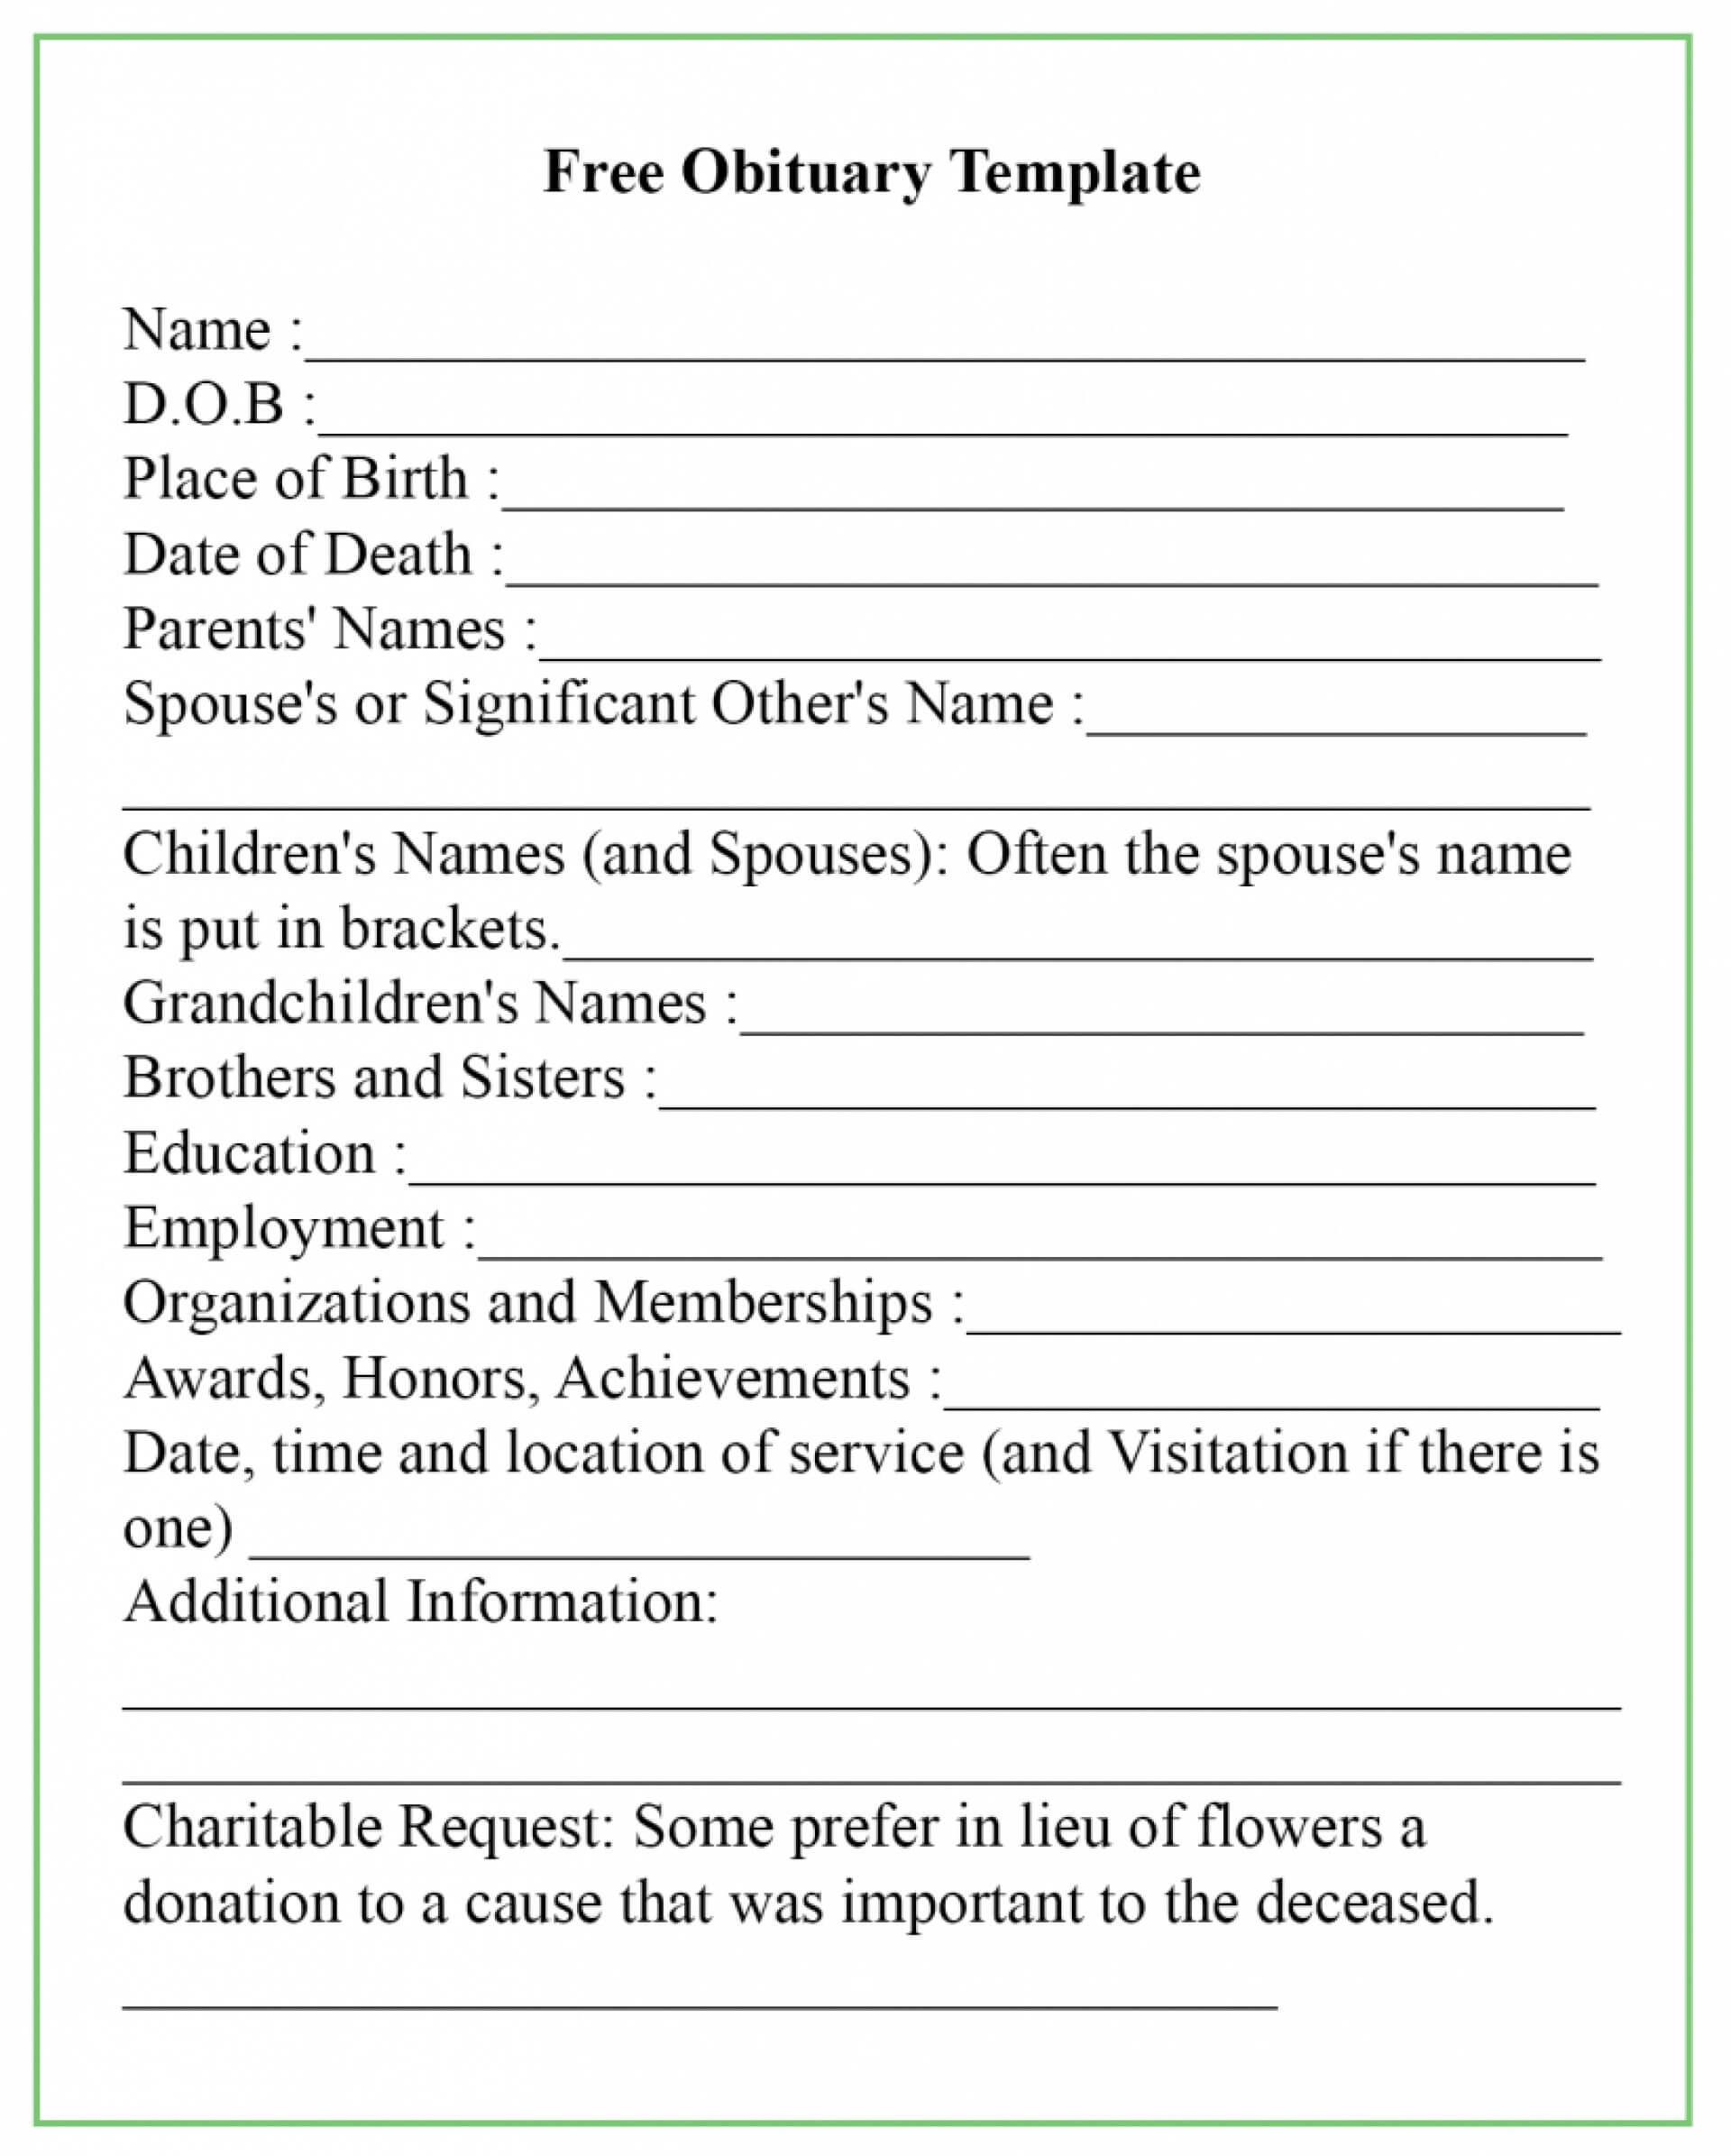 017 Download Free Printable Fill In The Blank Resume With Fill In The Blank Obituary Template